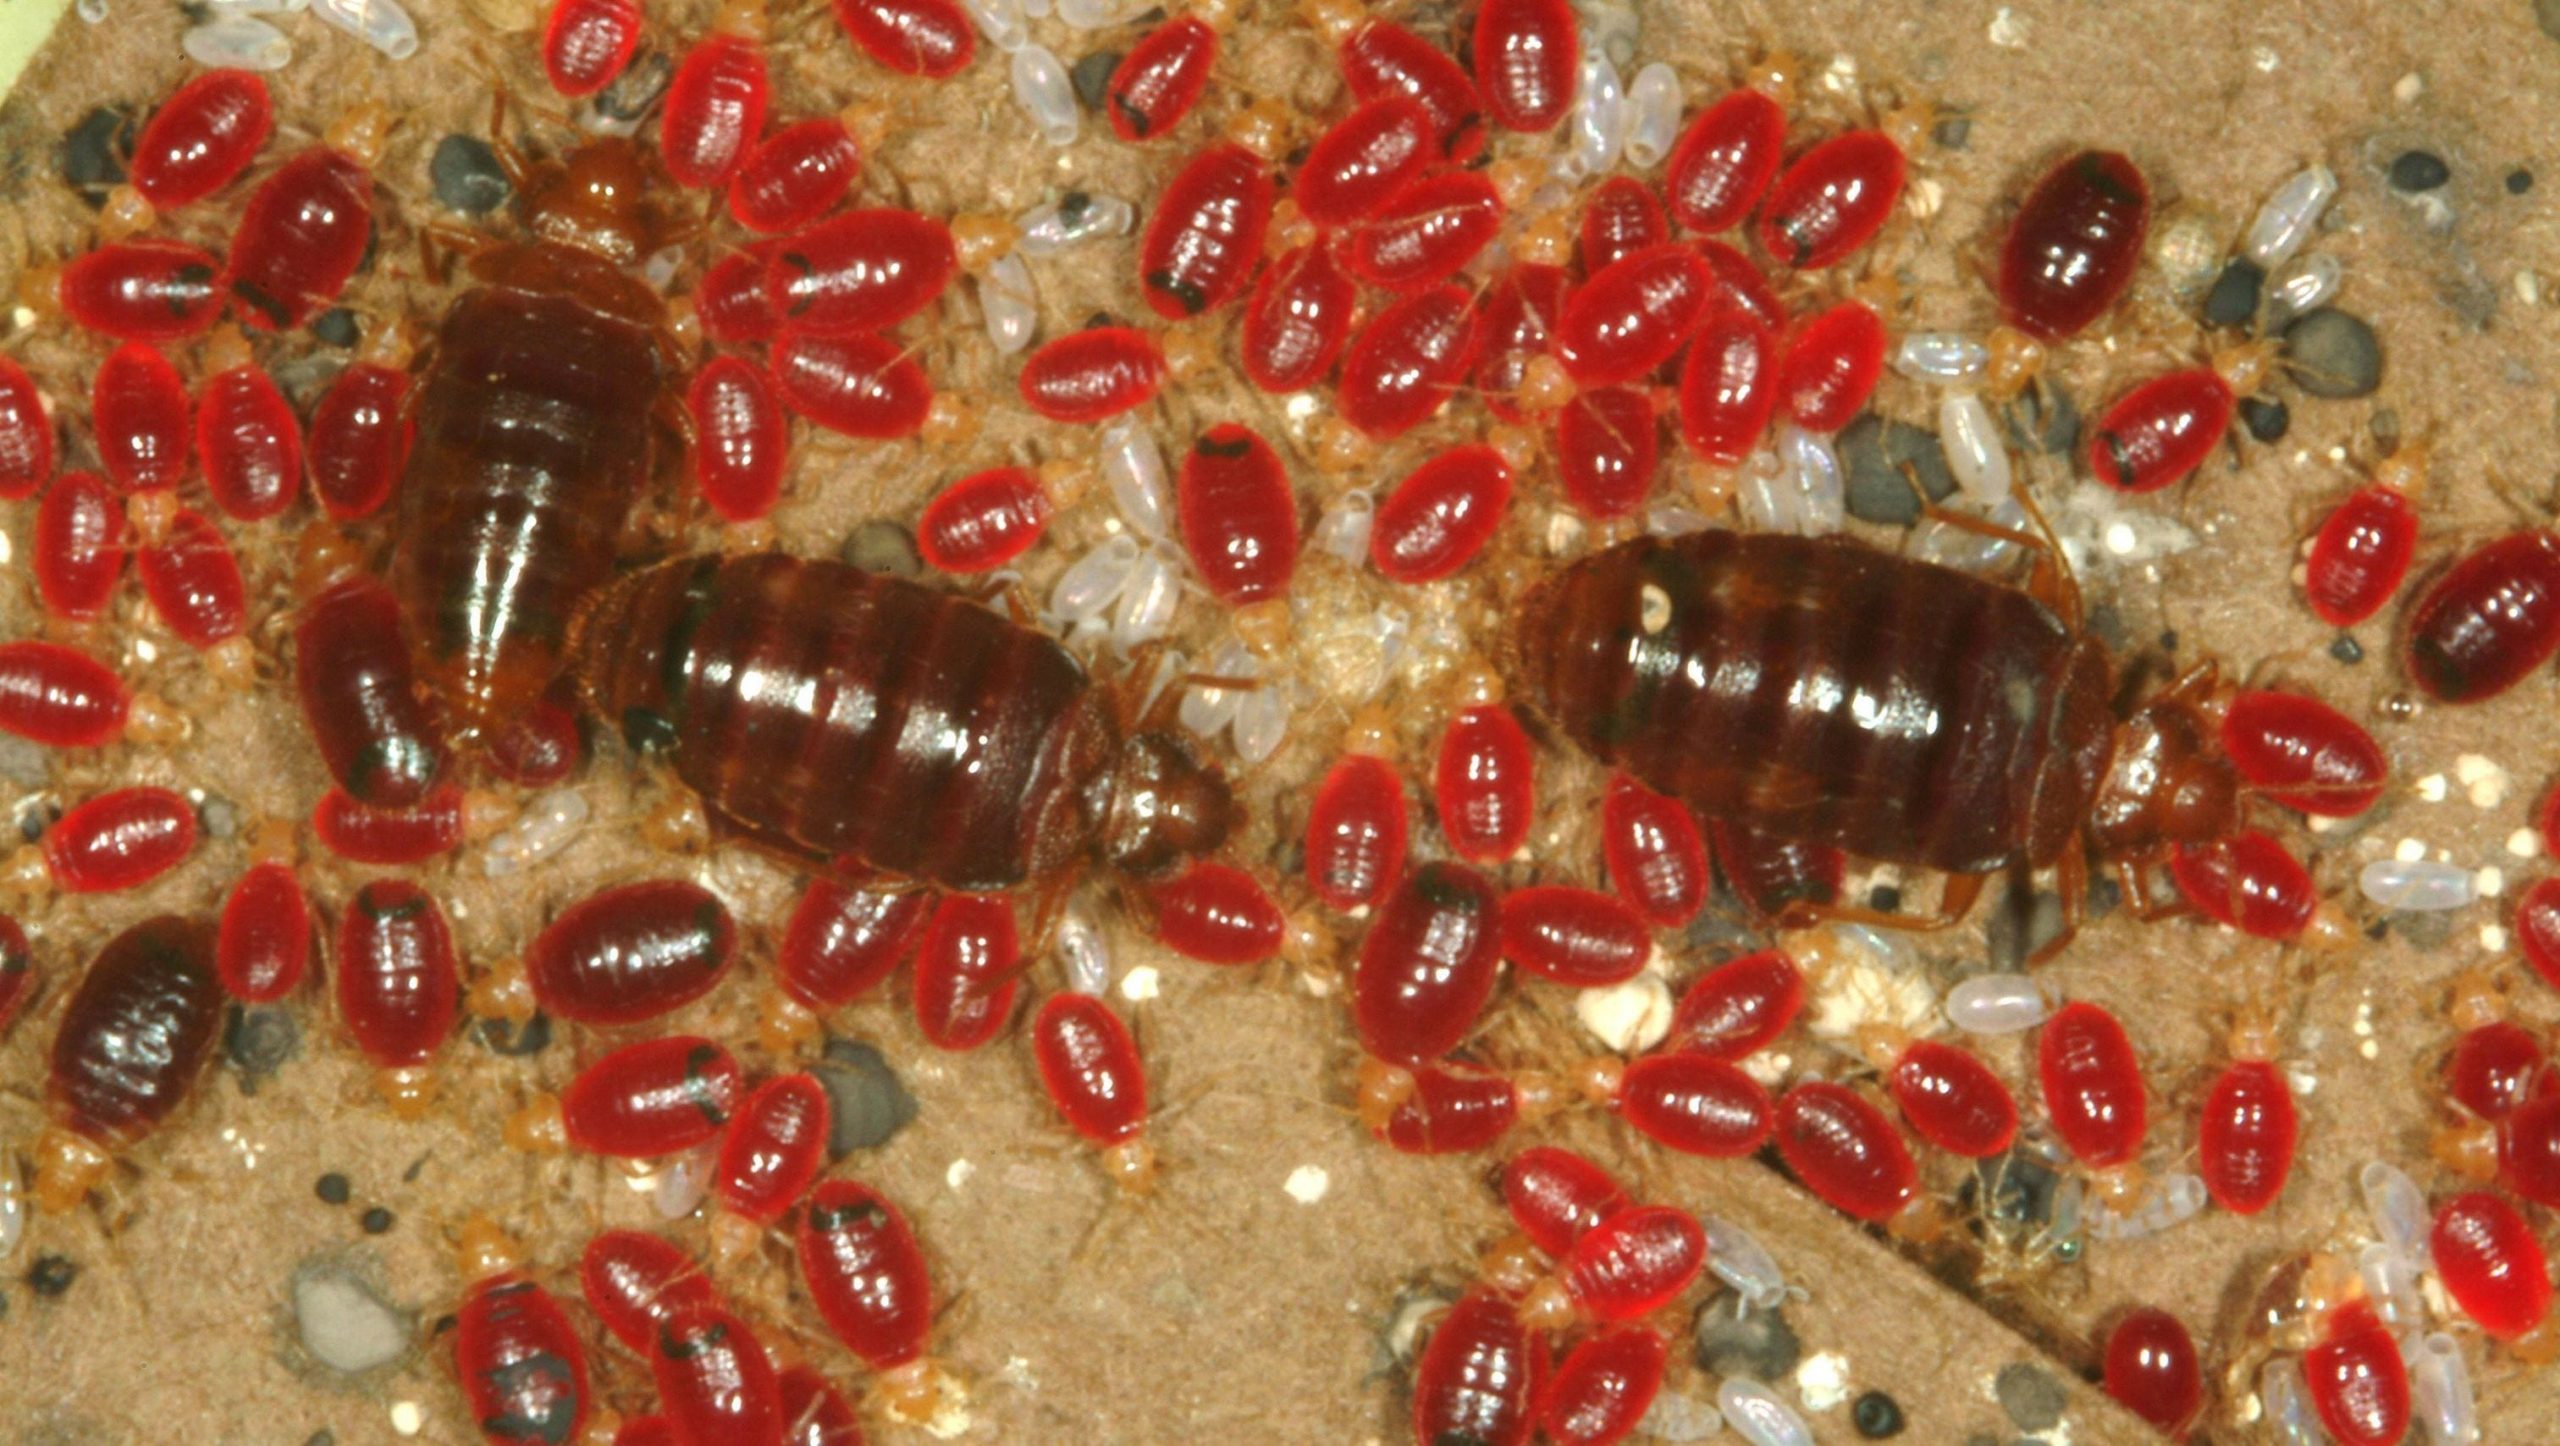 What causes bed bug infestations